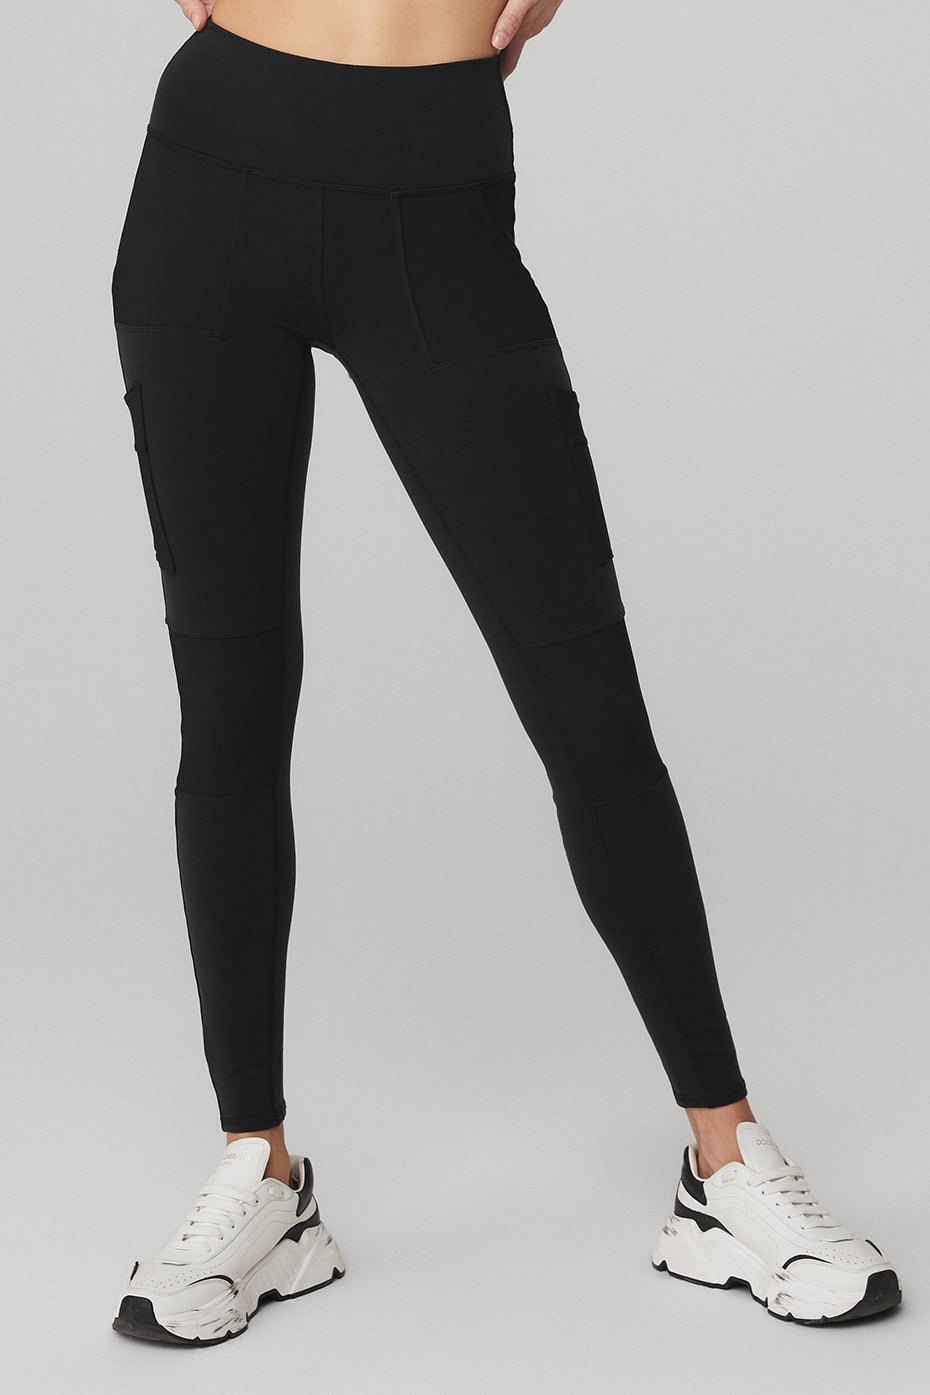 alo High Waisted Moto Legging Black W5494R - Free Shipping at